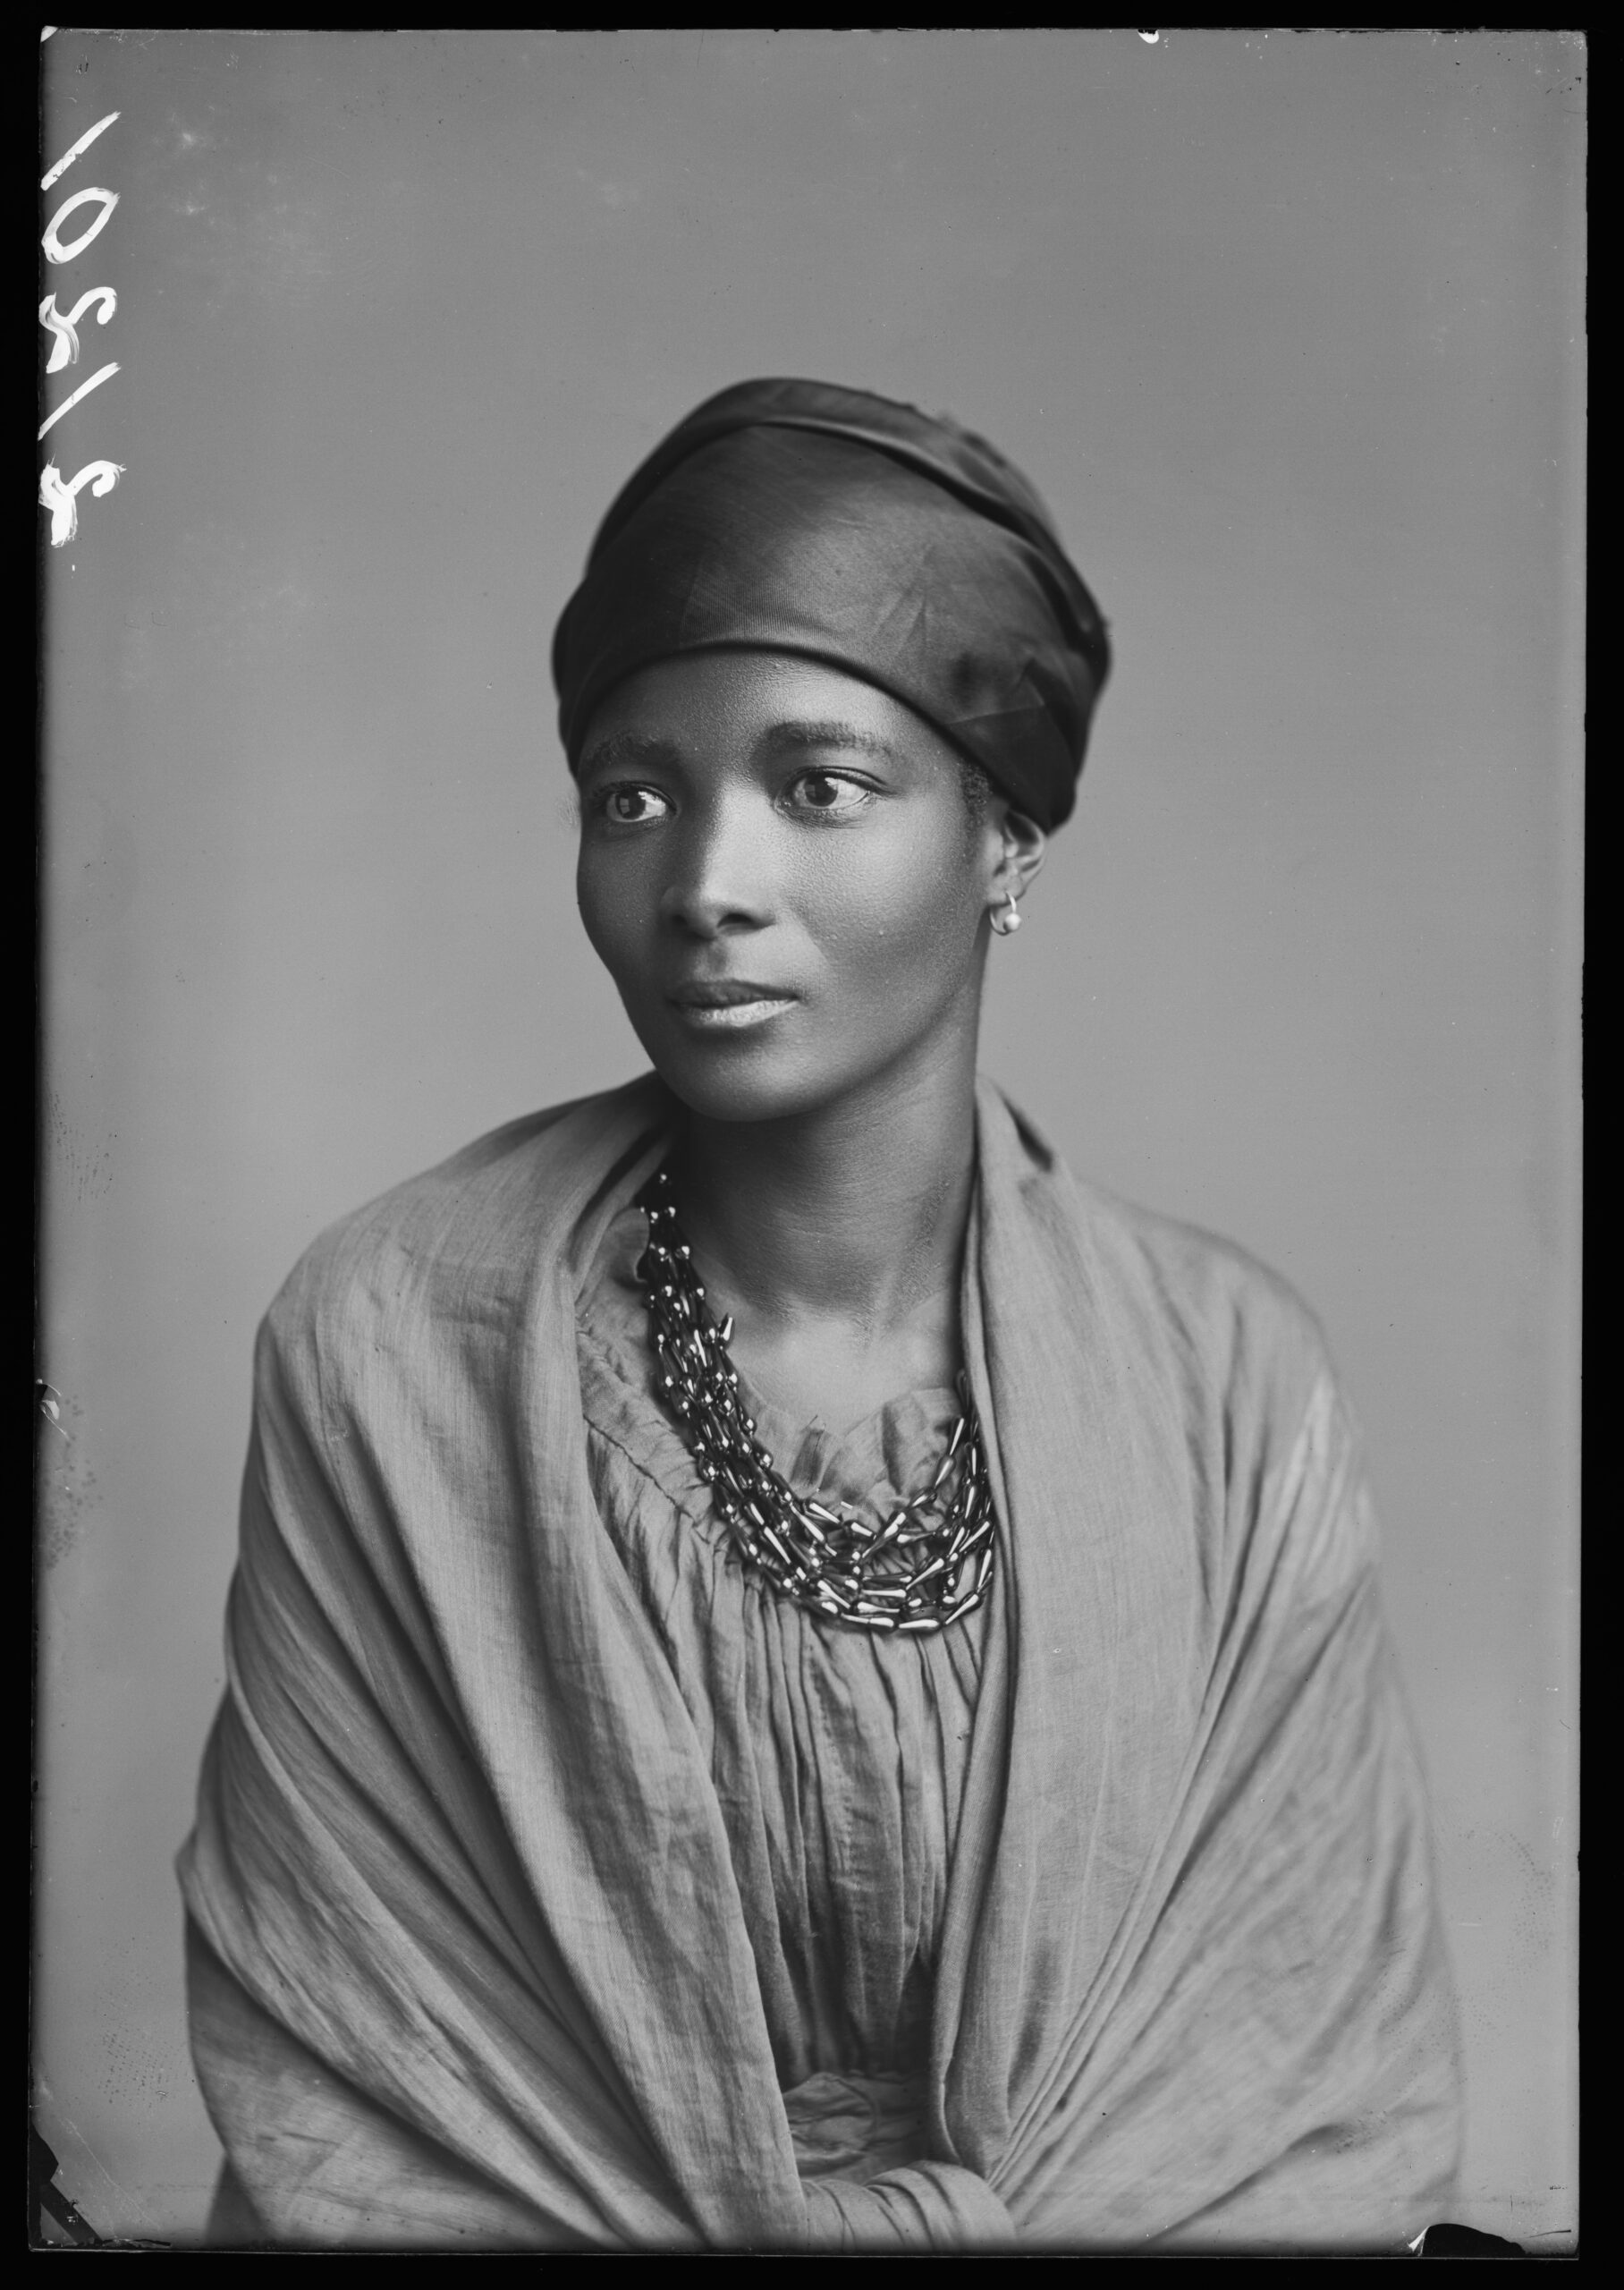 A black and white studio portrait of a woman seated and looking off to the right. She is wearing a headwrap and soft cloths wrap around her